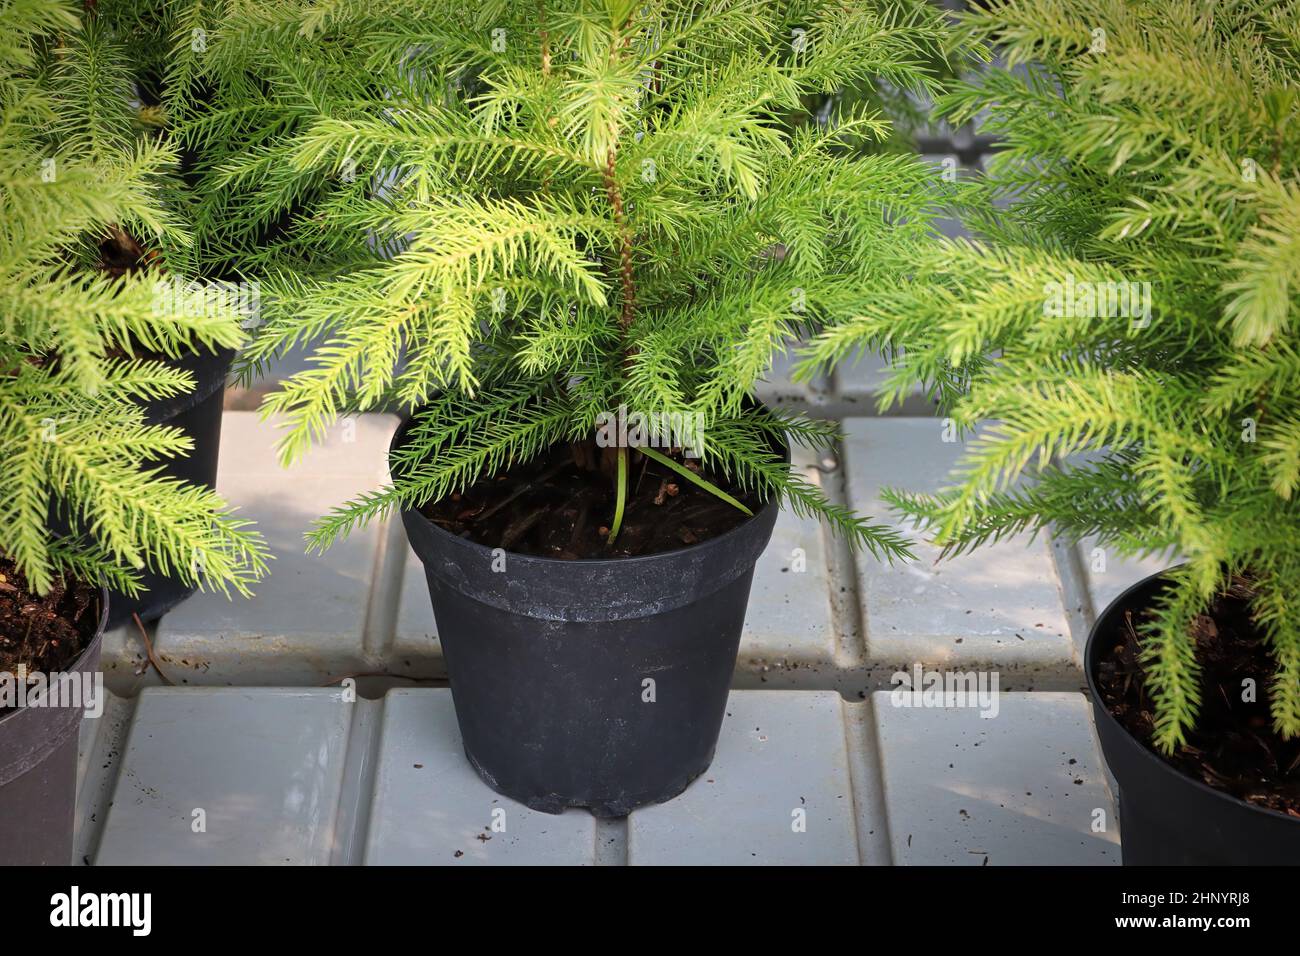 Closeup of a green potted norfolk pine plant. Stock Photo